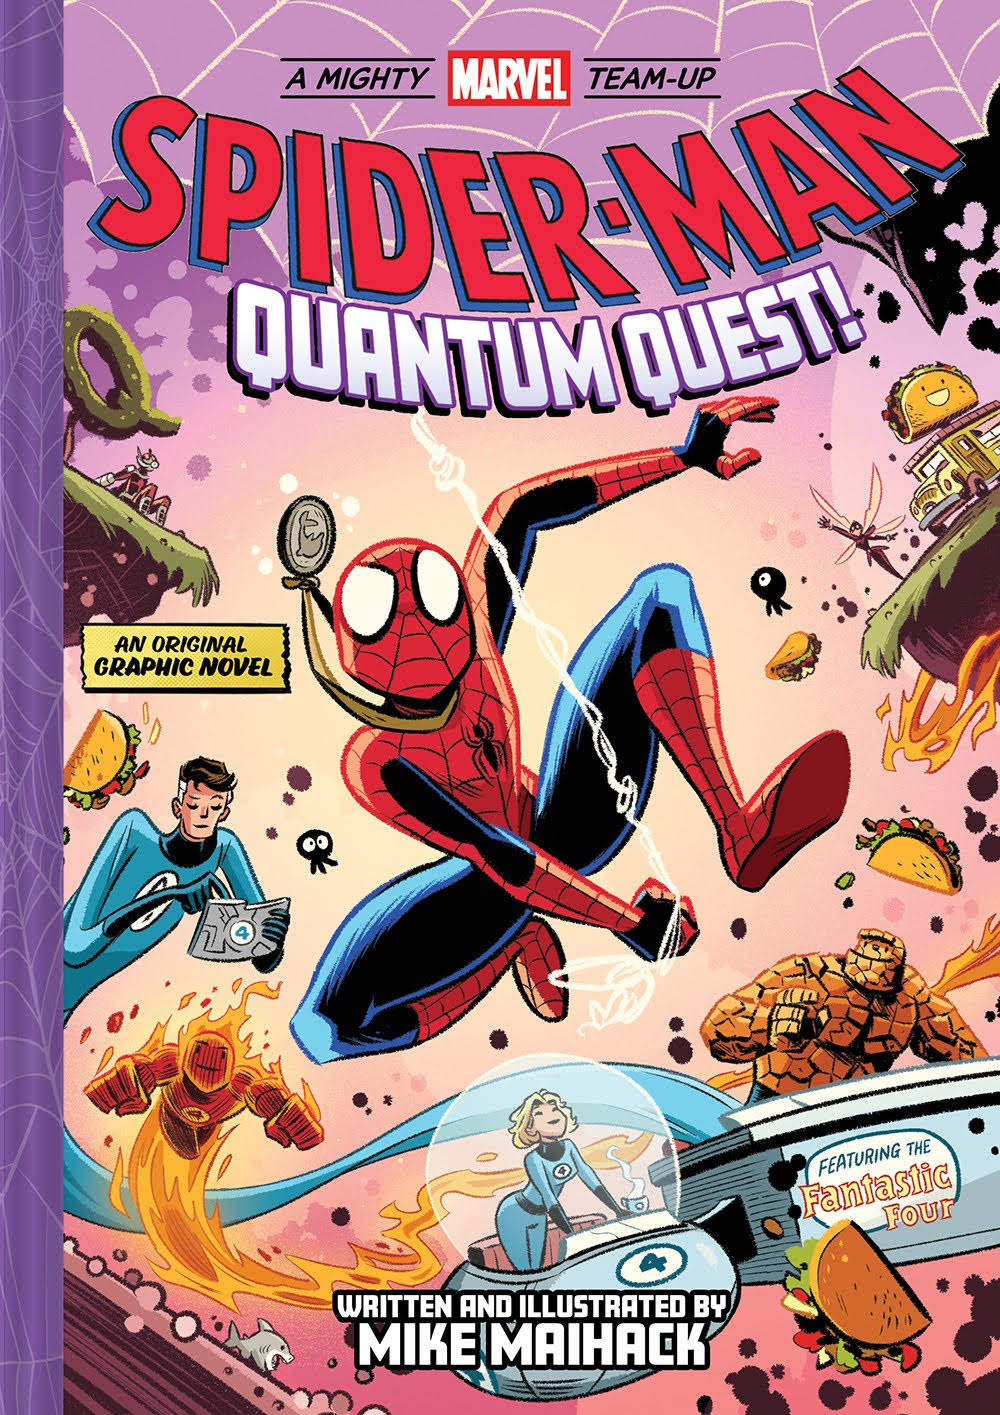 Mike Maihack on Spider-Man: Quantum Quest | Interview